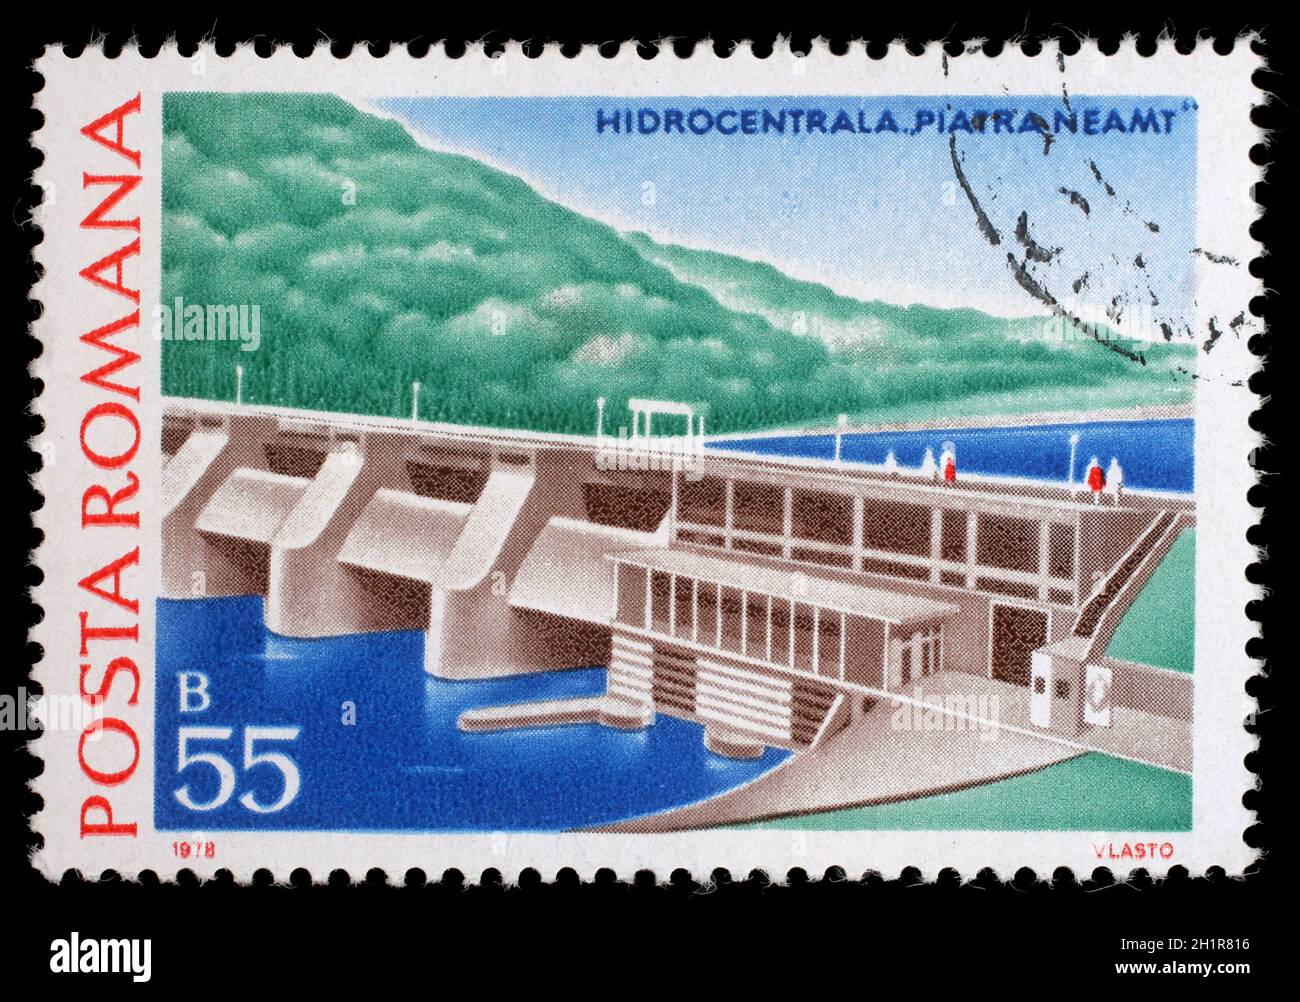 Stamp printed in Romania shows Piatra Neamt, Hydrotechnic Stations and Dams issue, circa 1978. Stock Photo